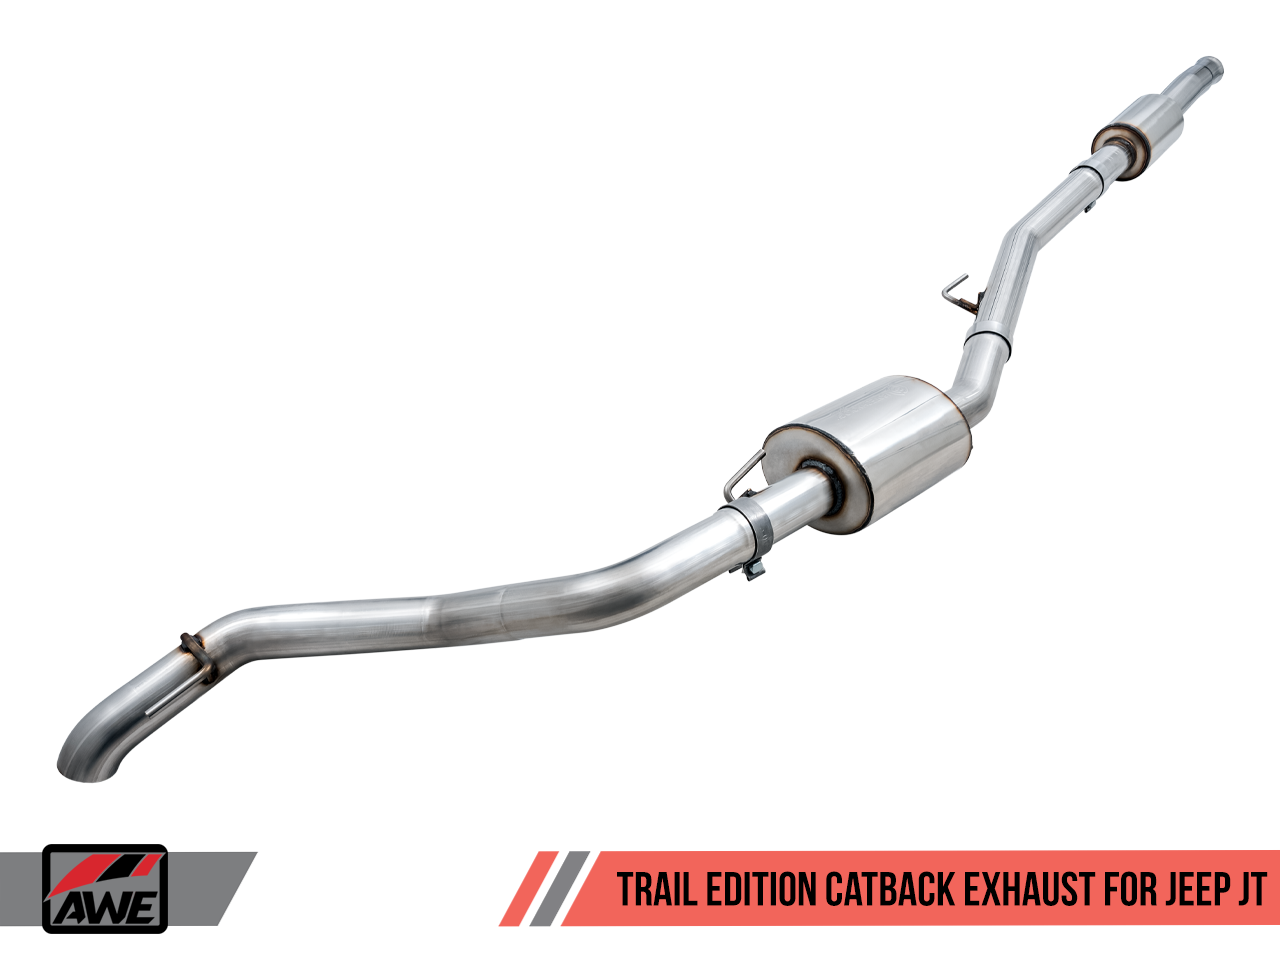 AWE Trail Edition Catback Exhaust for Jeep JT 3.6L (3015-21001)